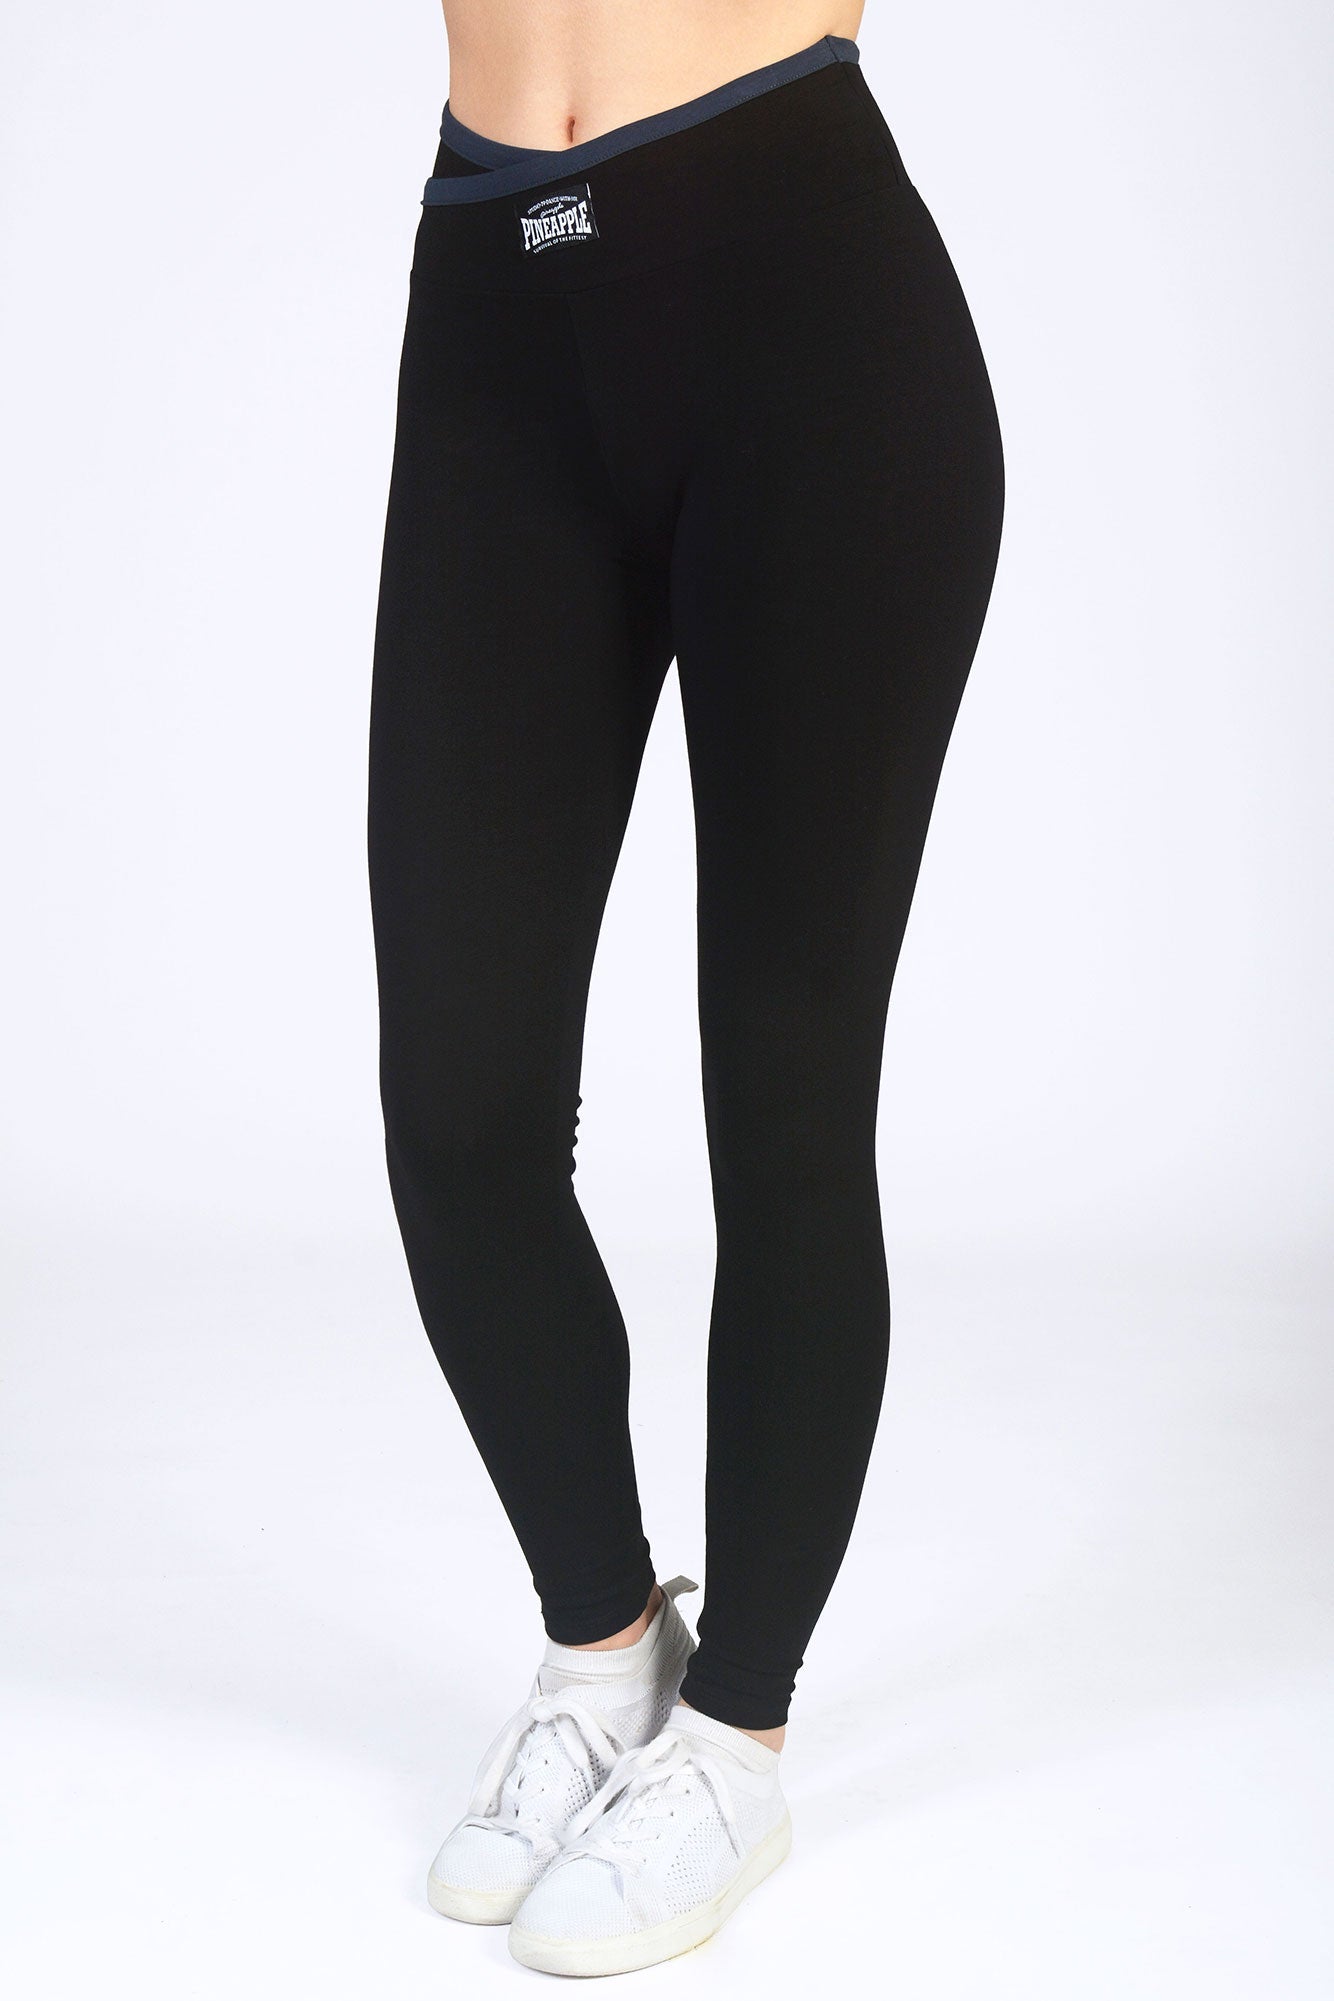 Buy Charcoal Wide Band Leggings from the Pineapple online store